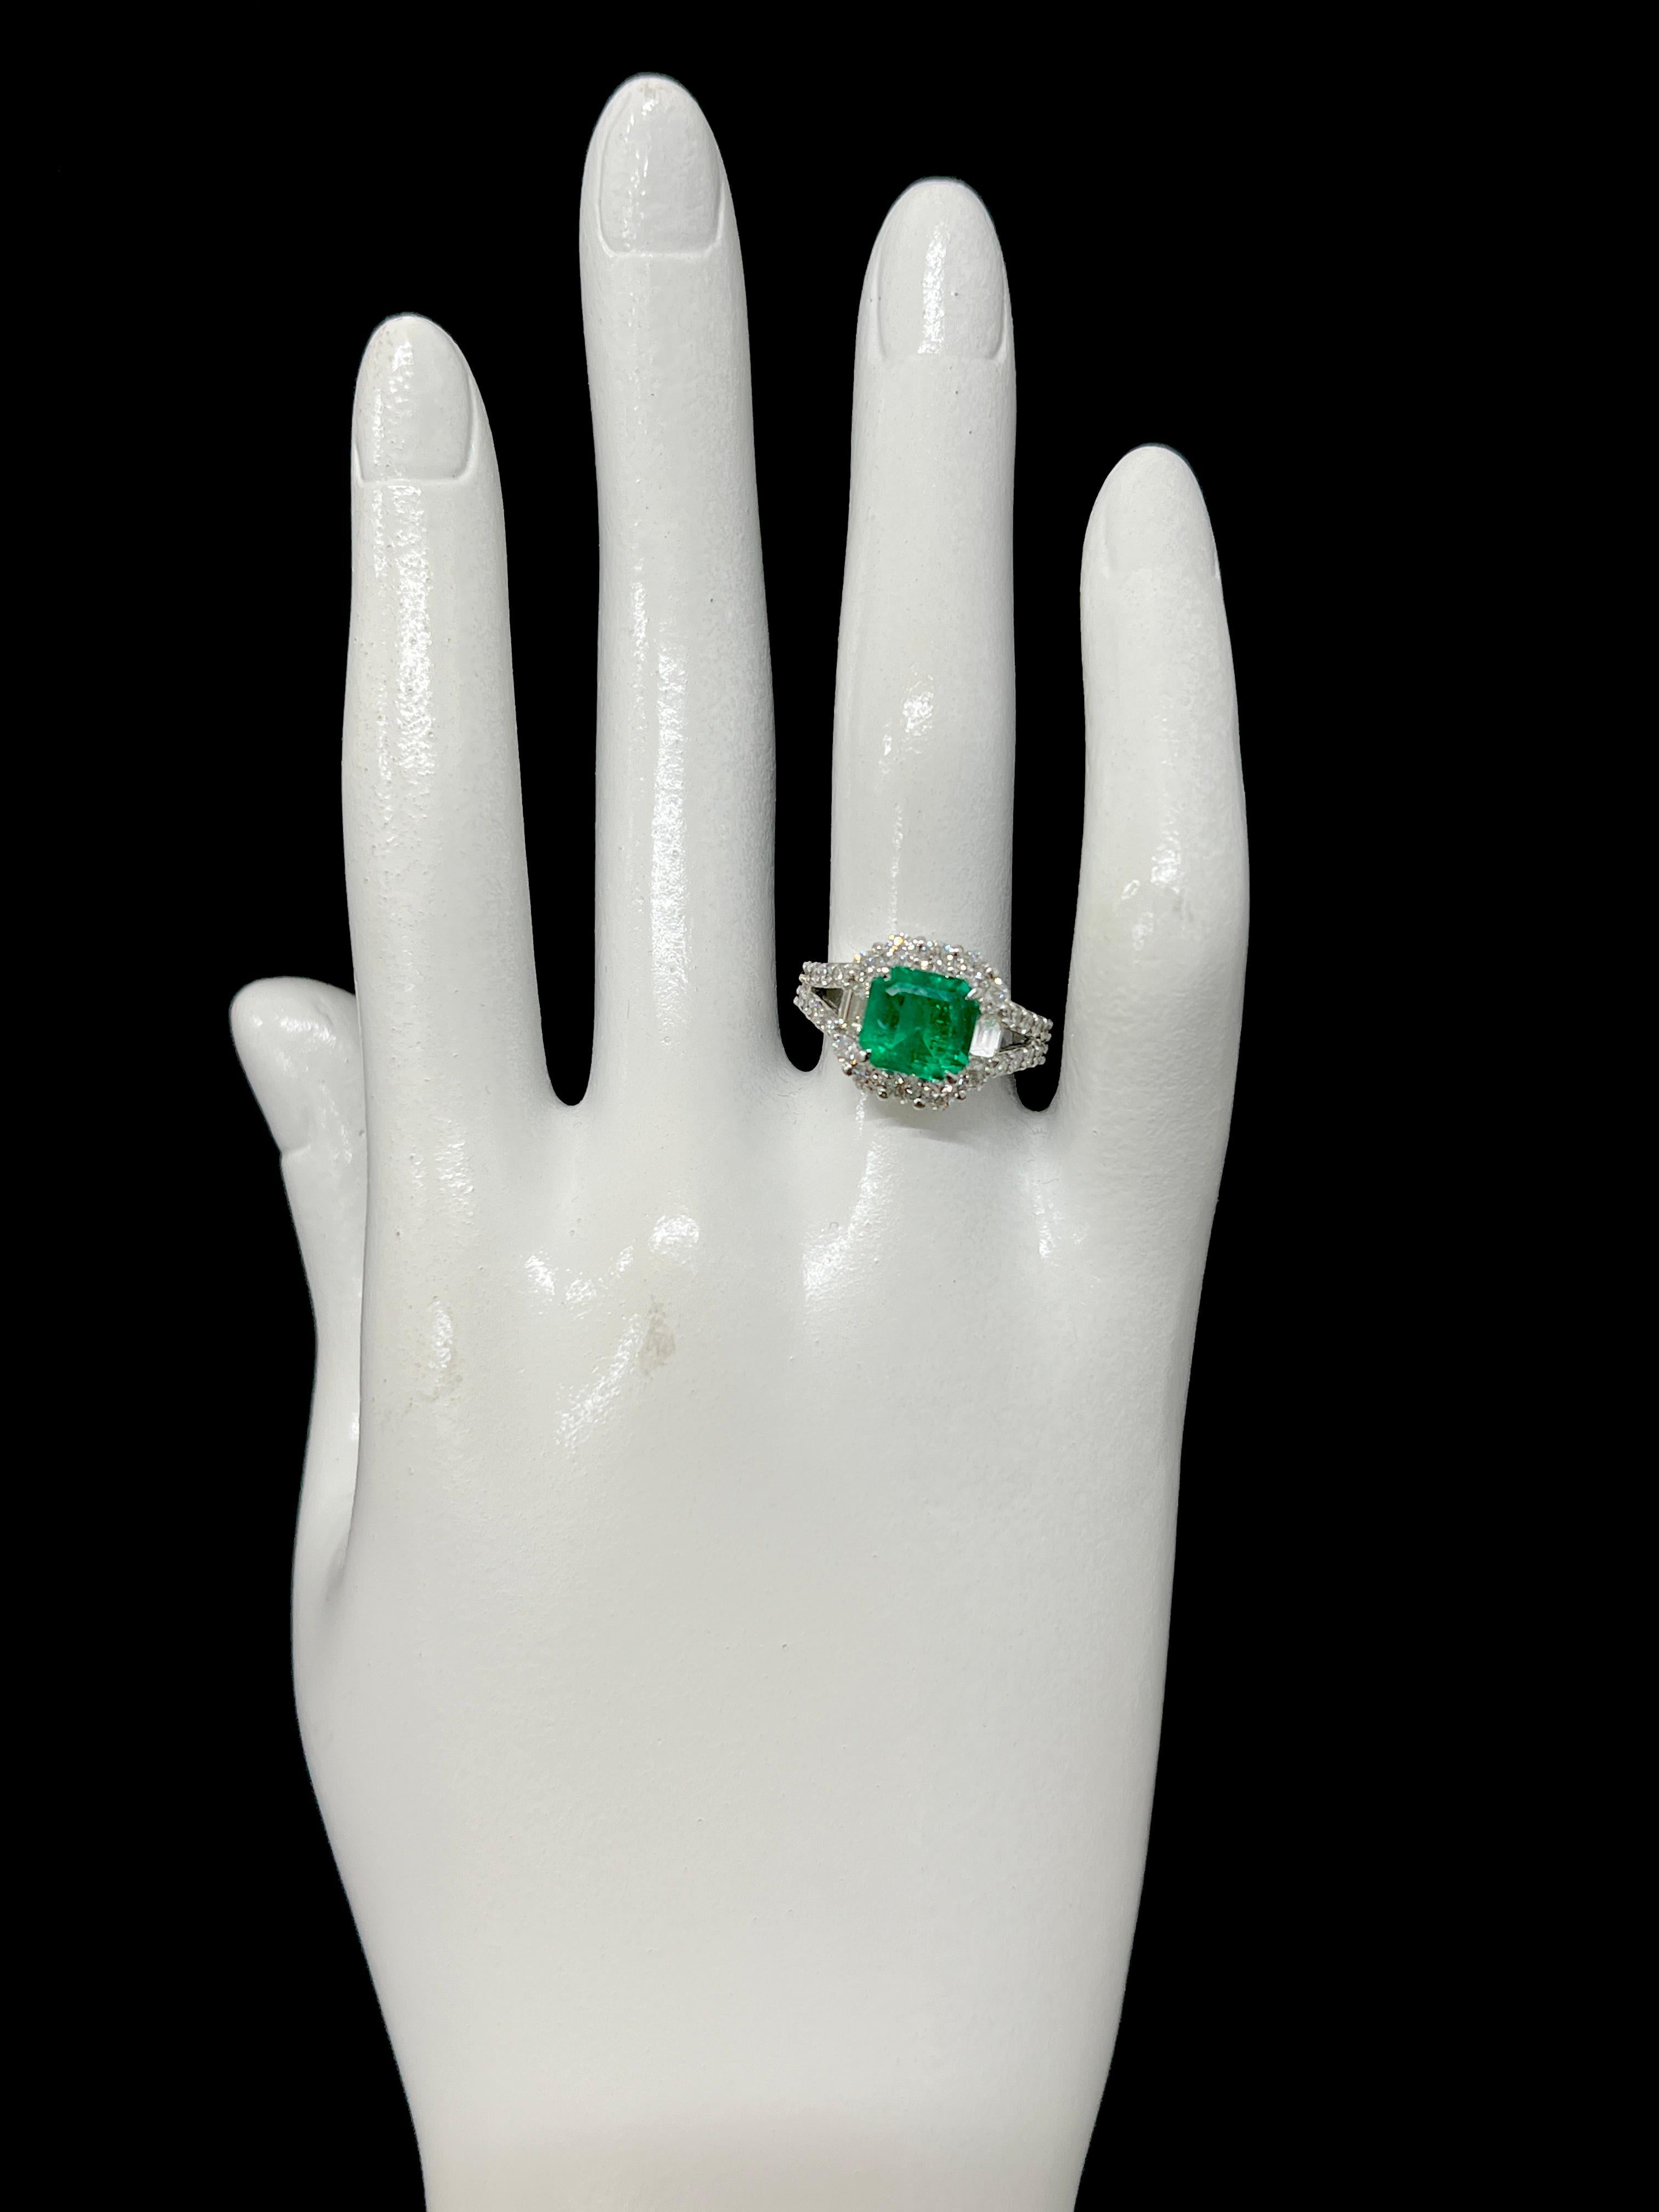 1.97 Carat Natural Colombian Emerald and Diamond Ring Made in Platinum For Sale 1